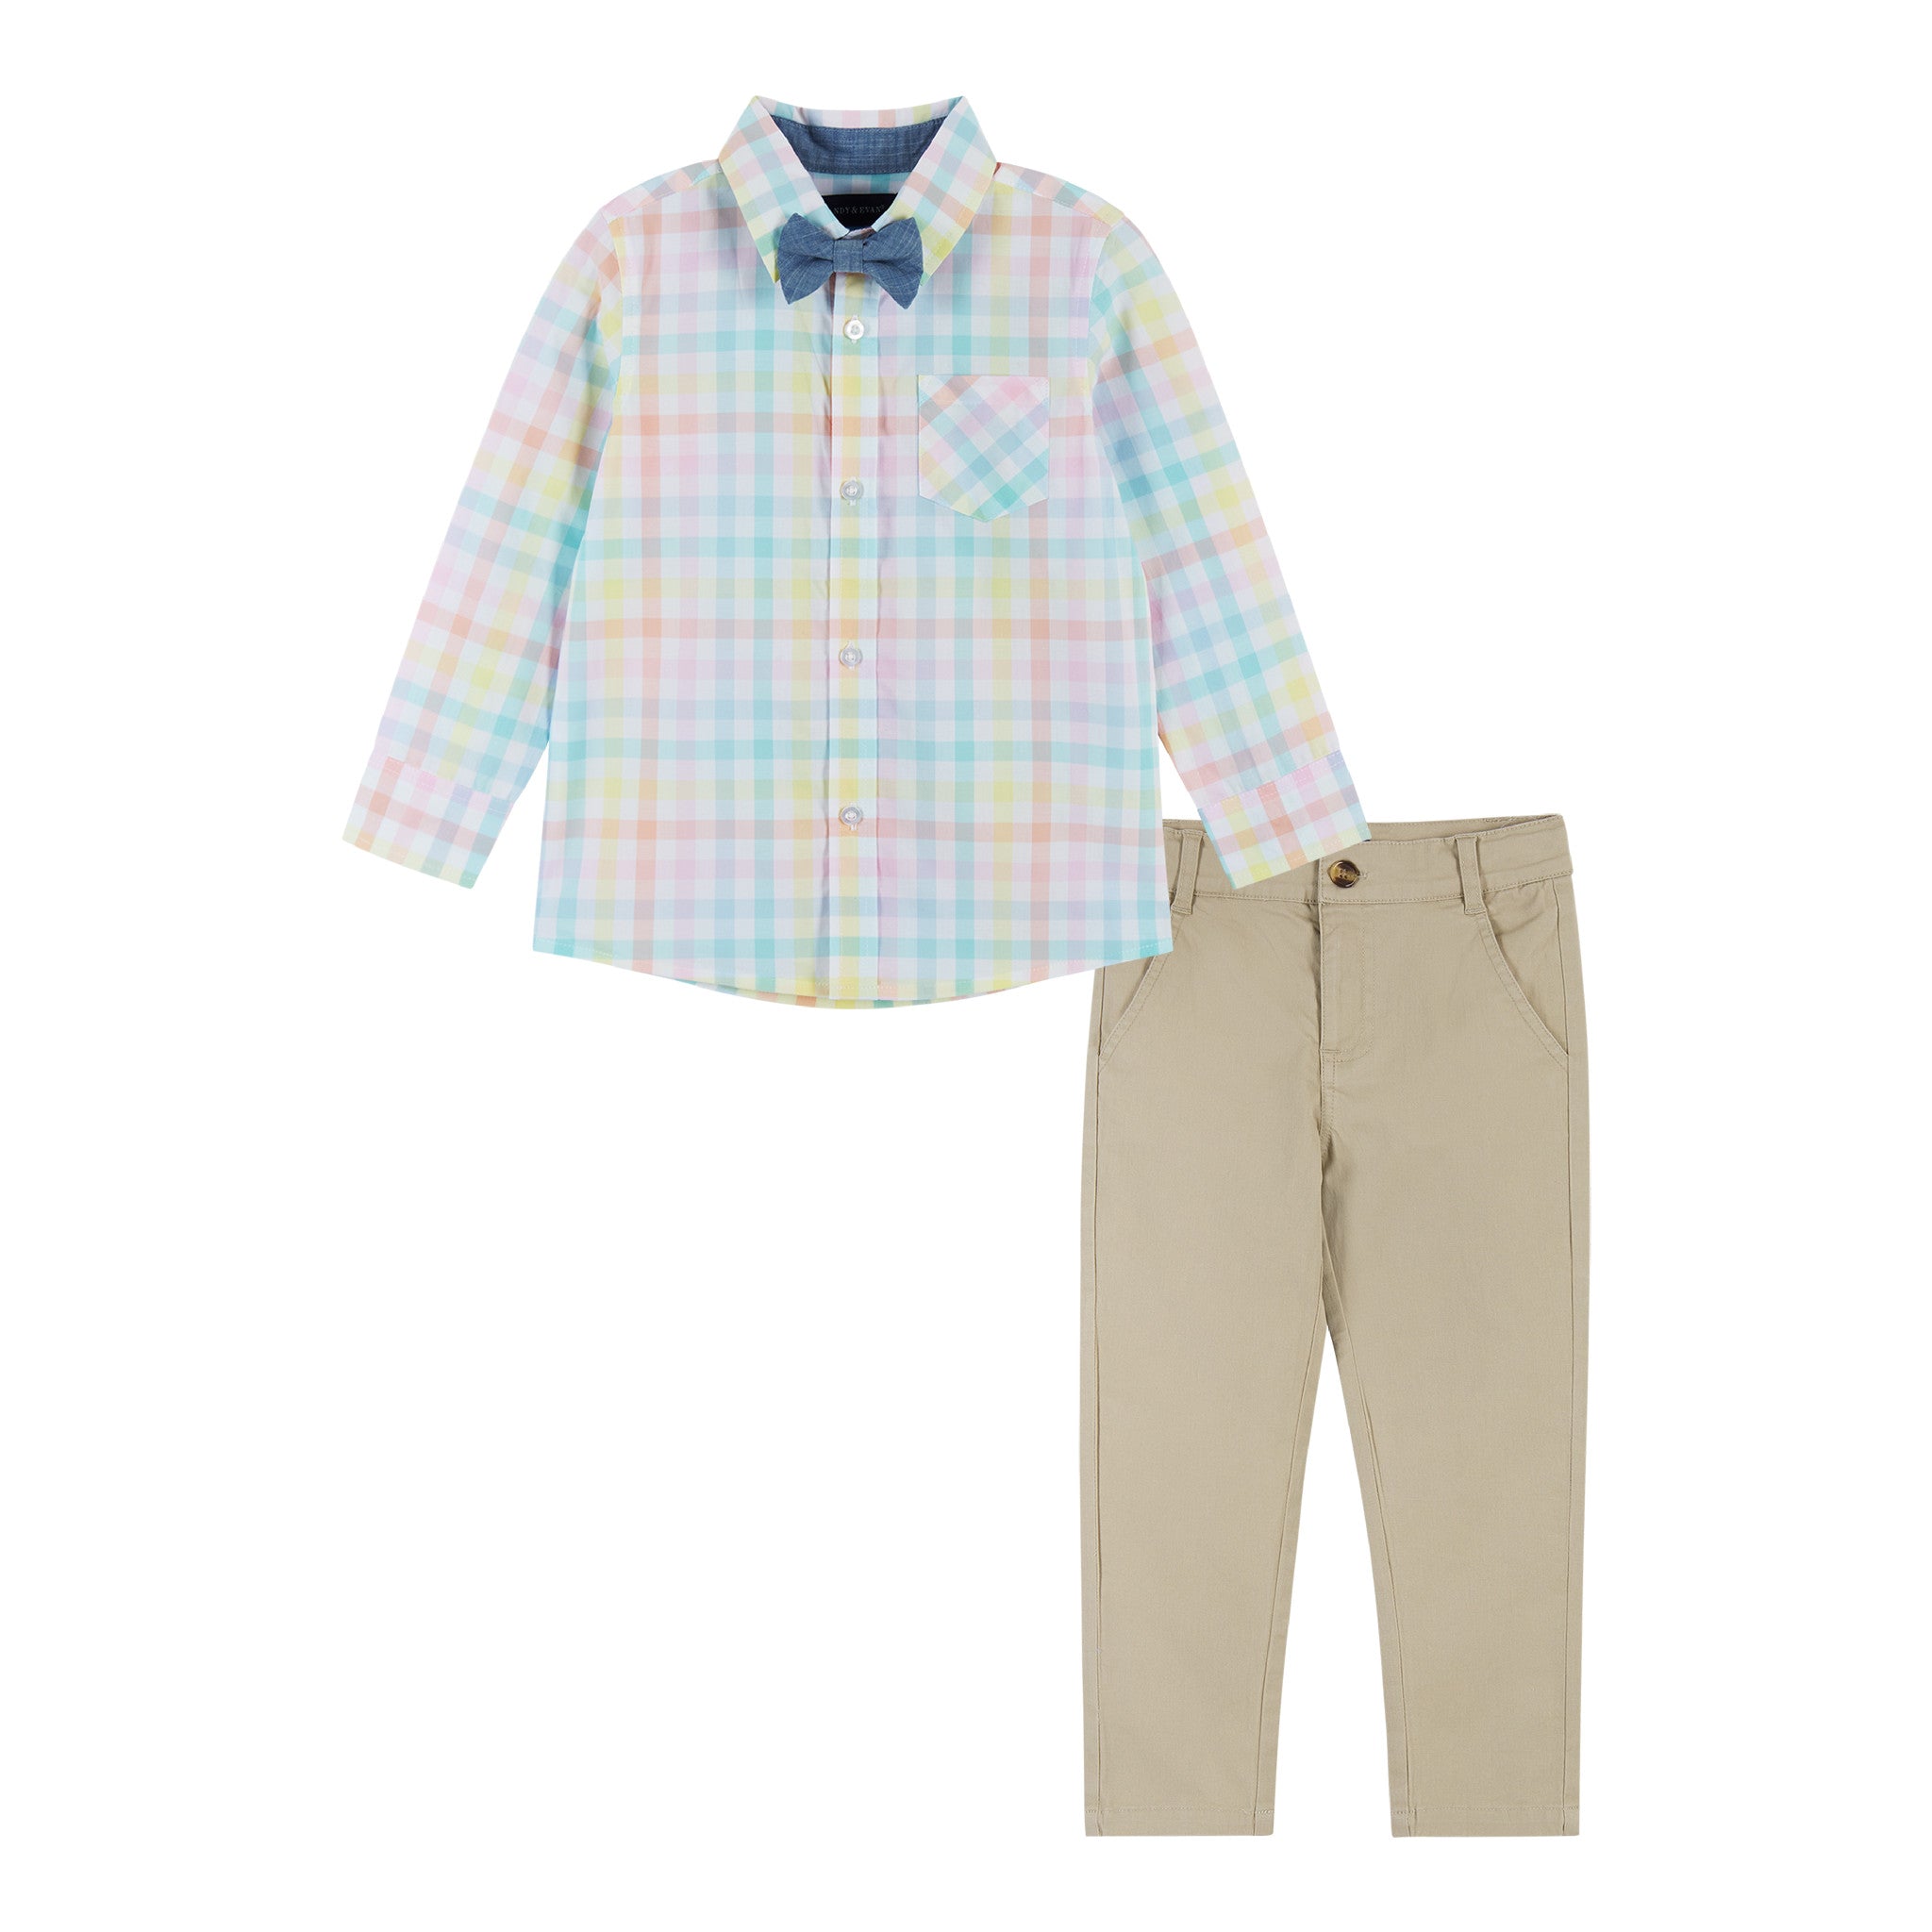 Blue Gingham Boys Button Up Shirt for Easter 4T